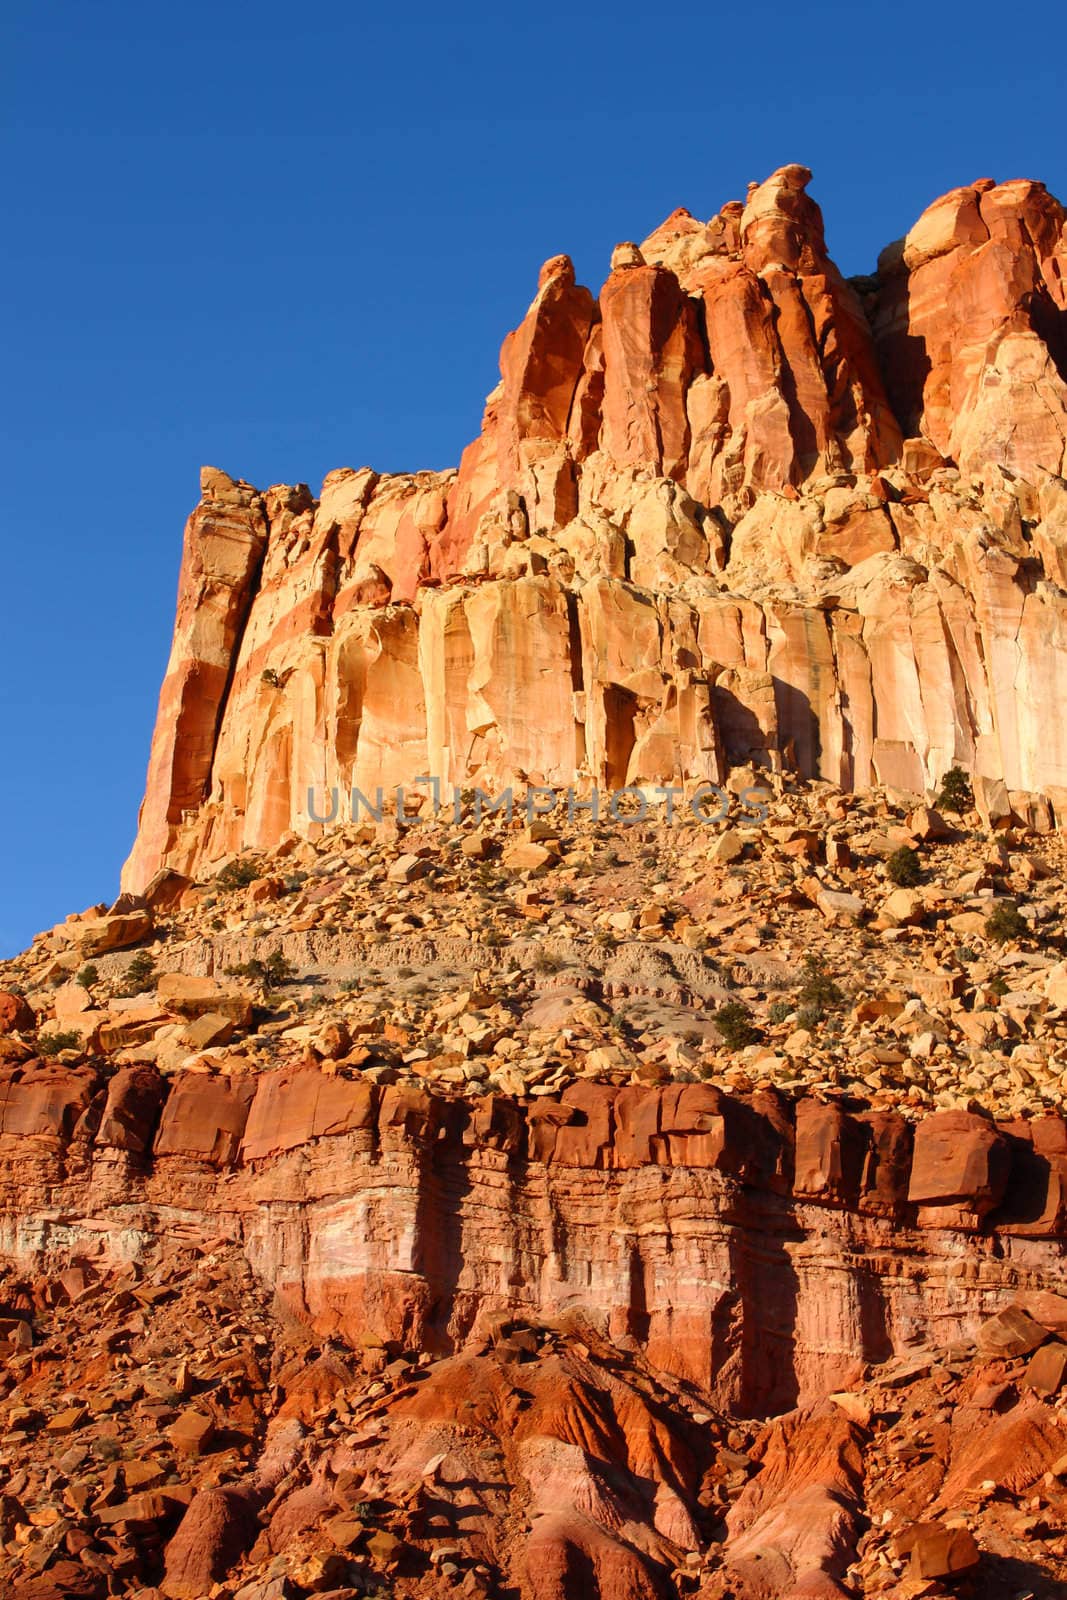 Red rock formations dominate the landscape of Capitol Reef National Park in Utah.